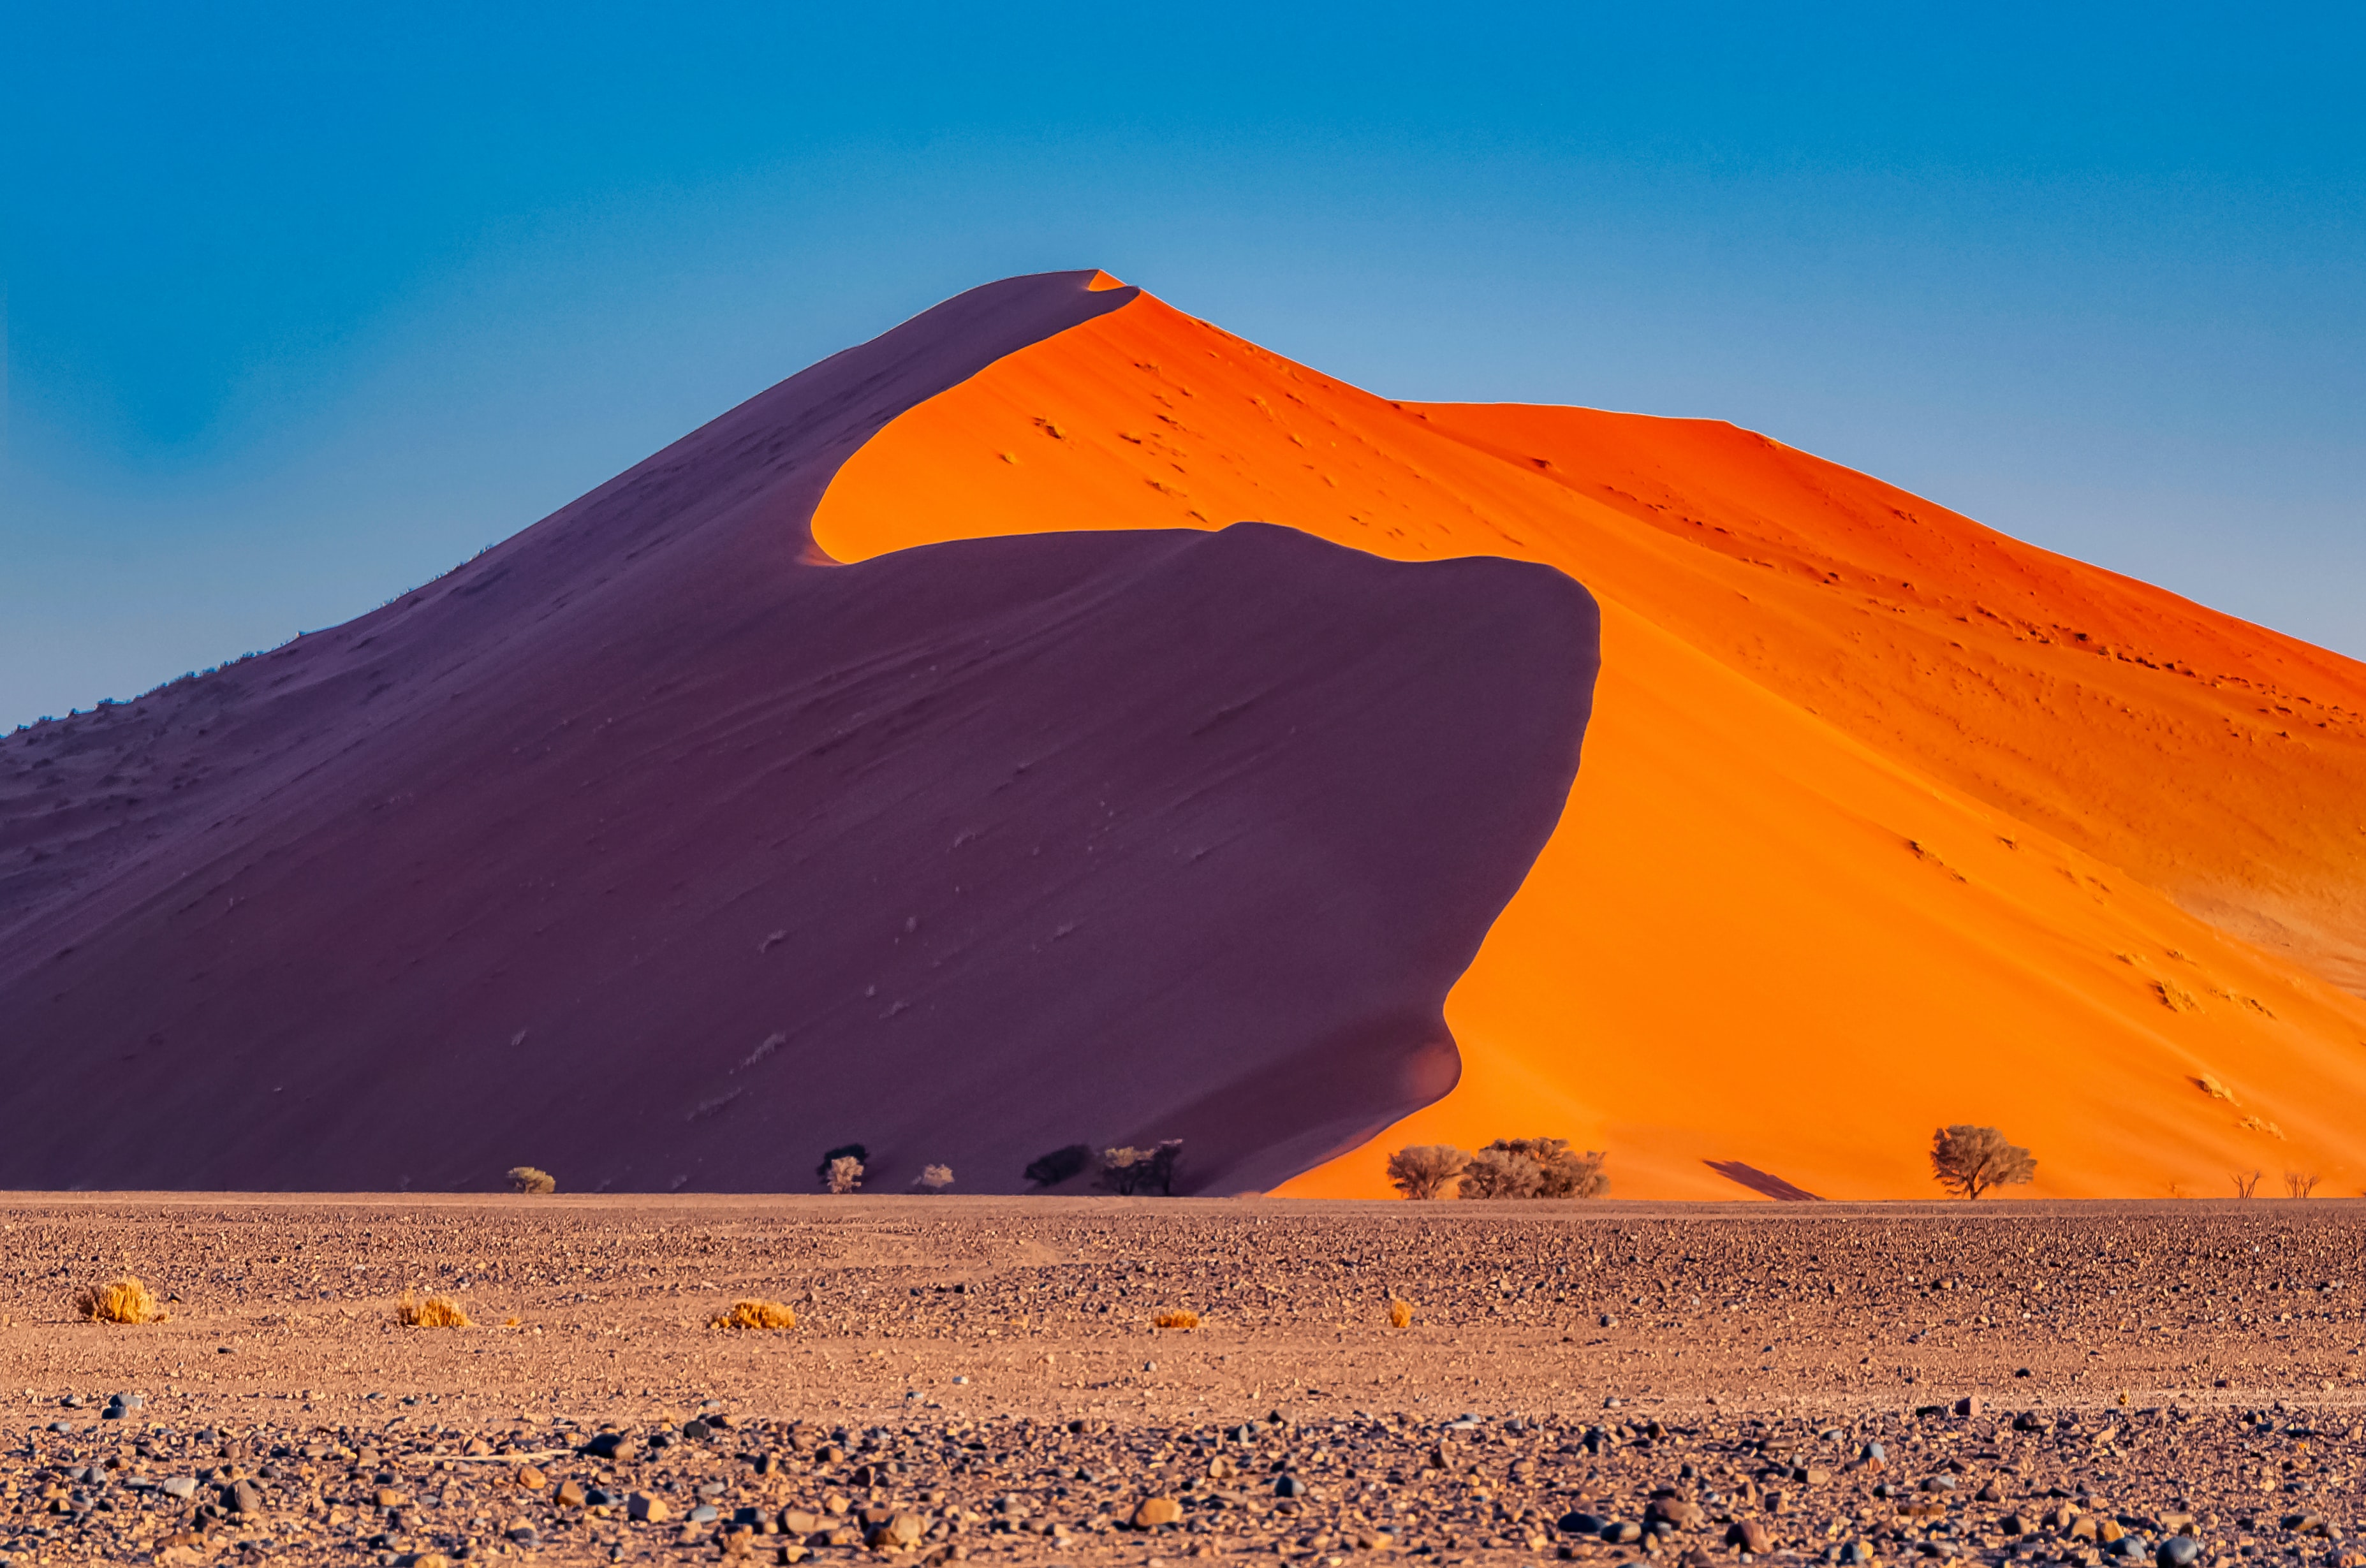 Namibia 4K wallpaper for your desktop or mobile screen free and easy to download